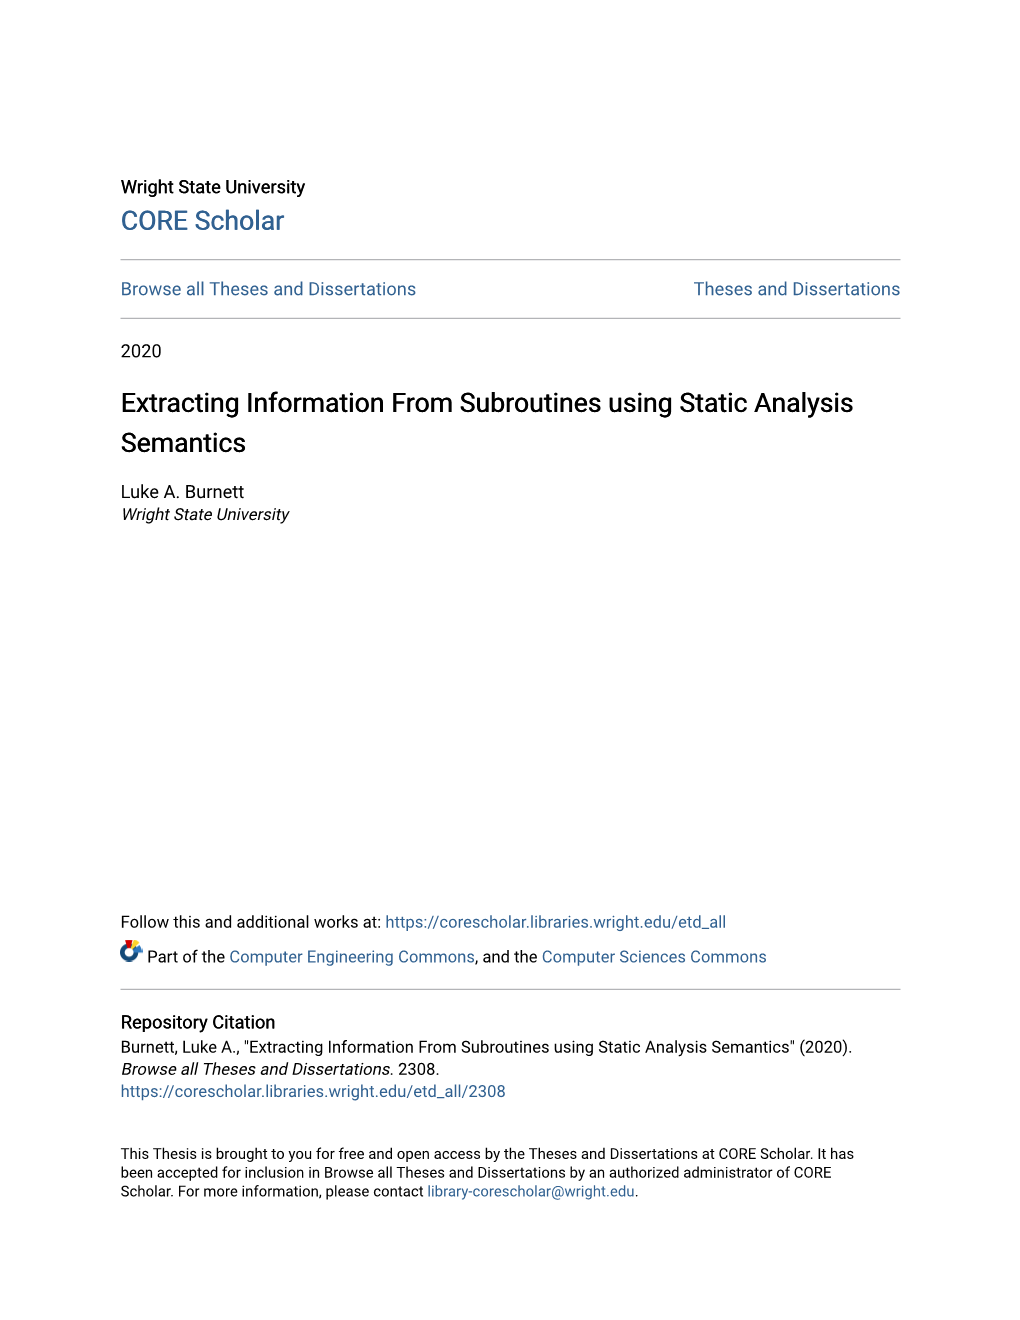 Extracting Information from Subroutines Using Static Analysis Semantics